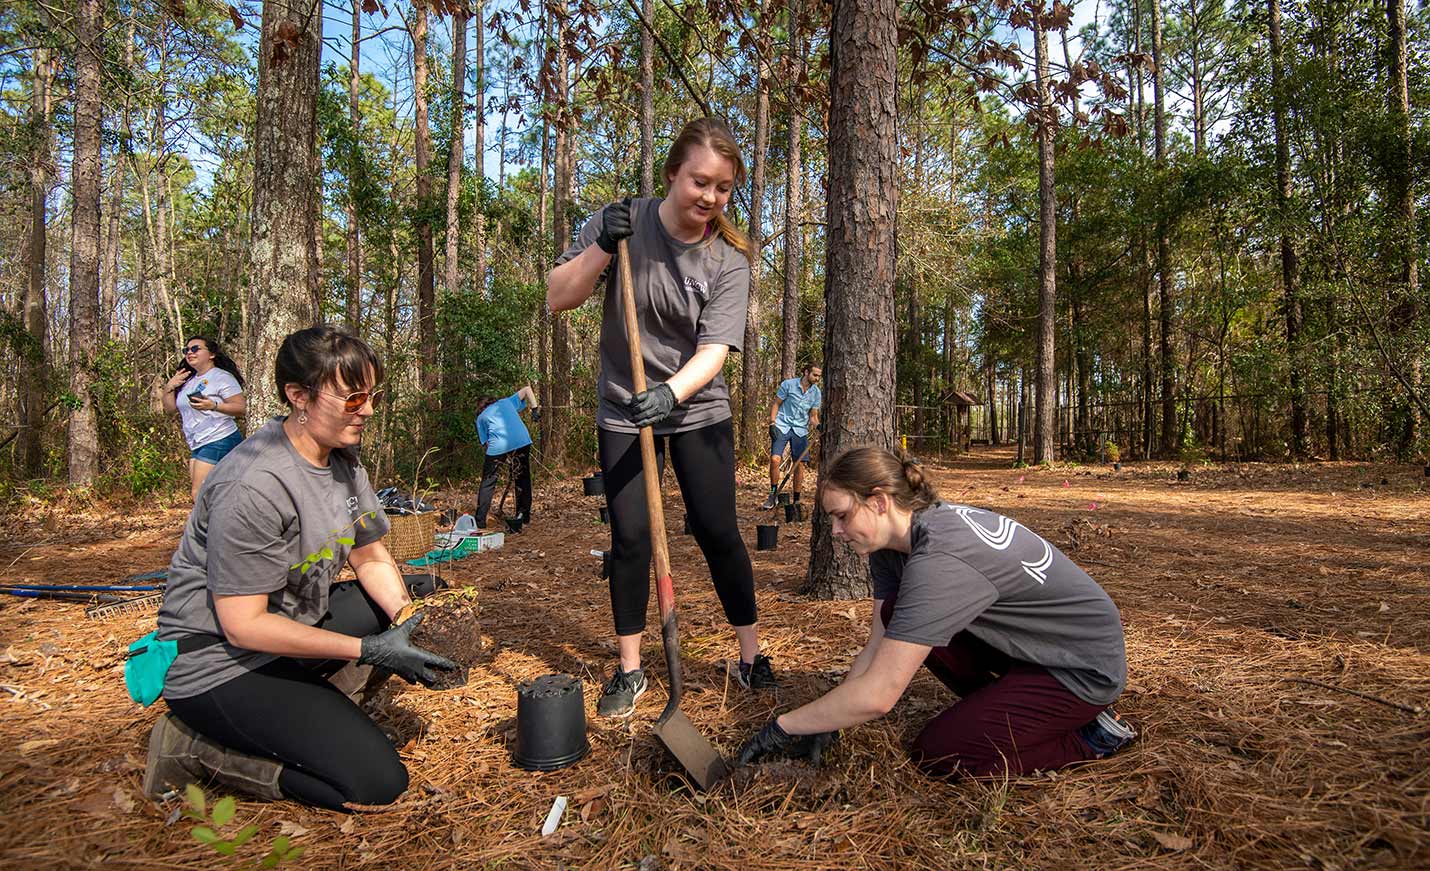 Three students, one holding a shovel, work to plant a tree